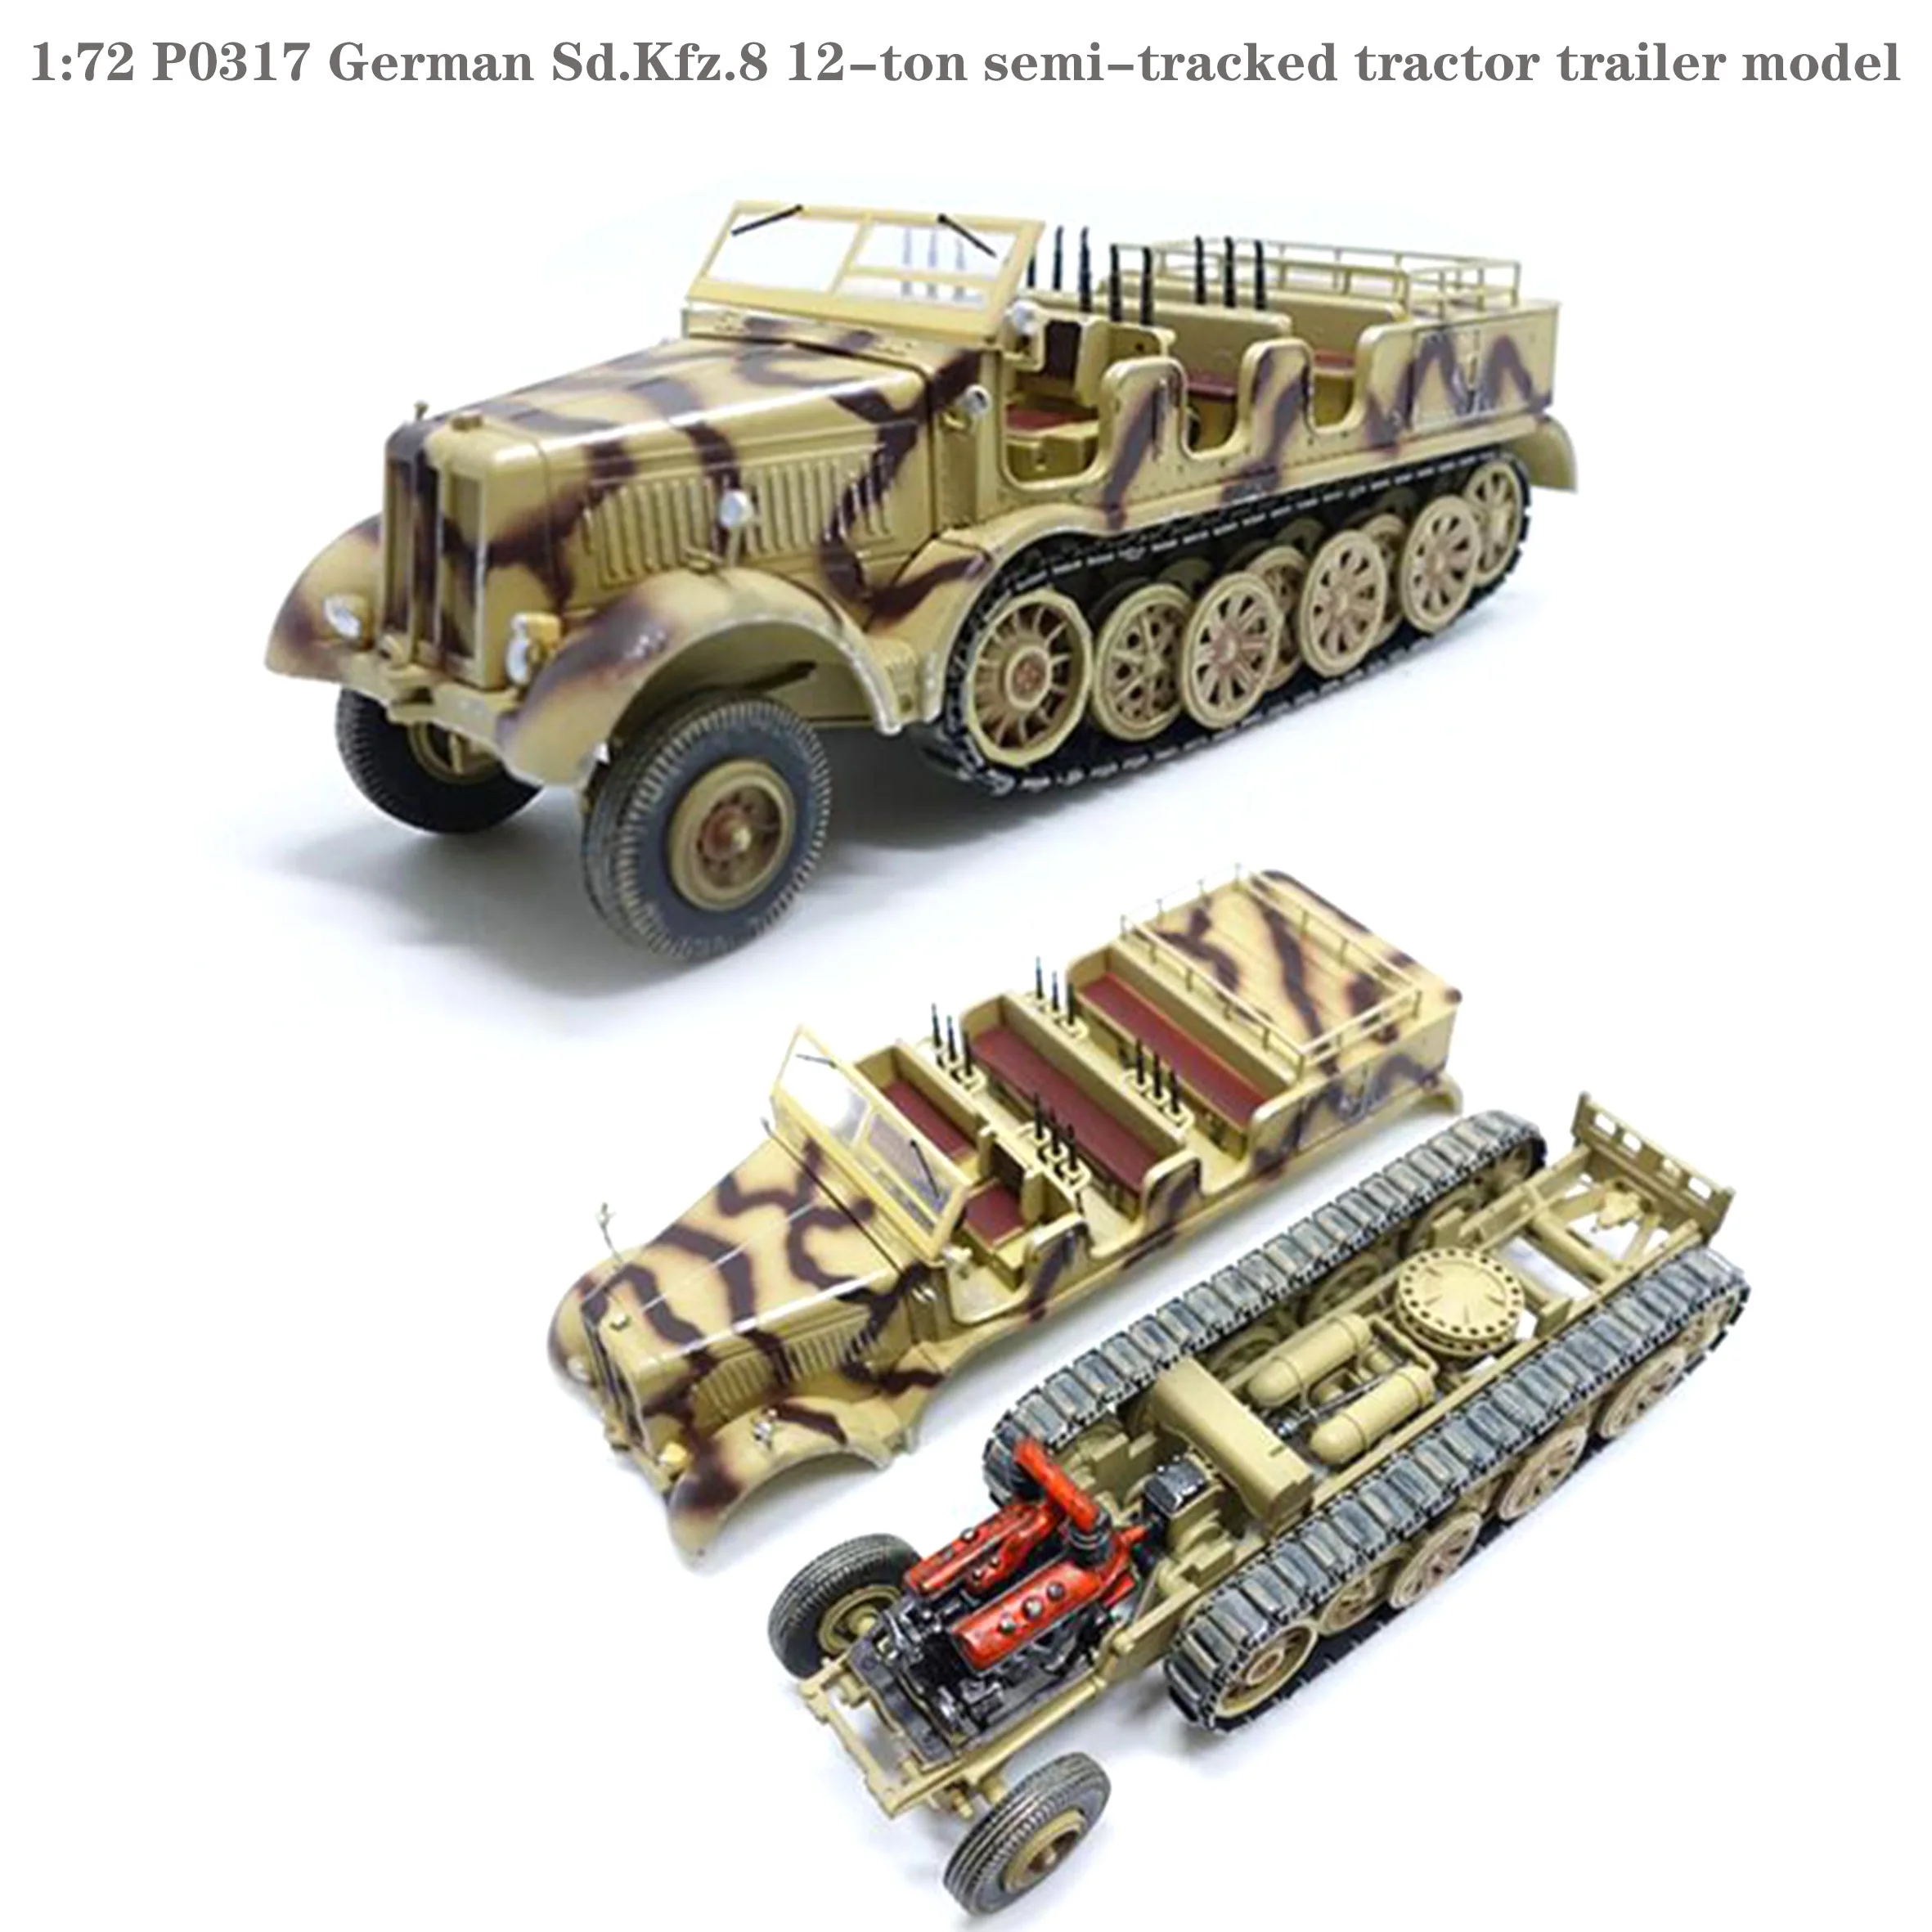 

Fine 1:72 P0317 German Sd.Kfz.8 12-ton semi-tracked tractor trailer model Finished product collection model